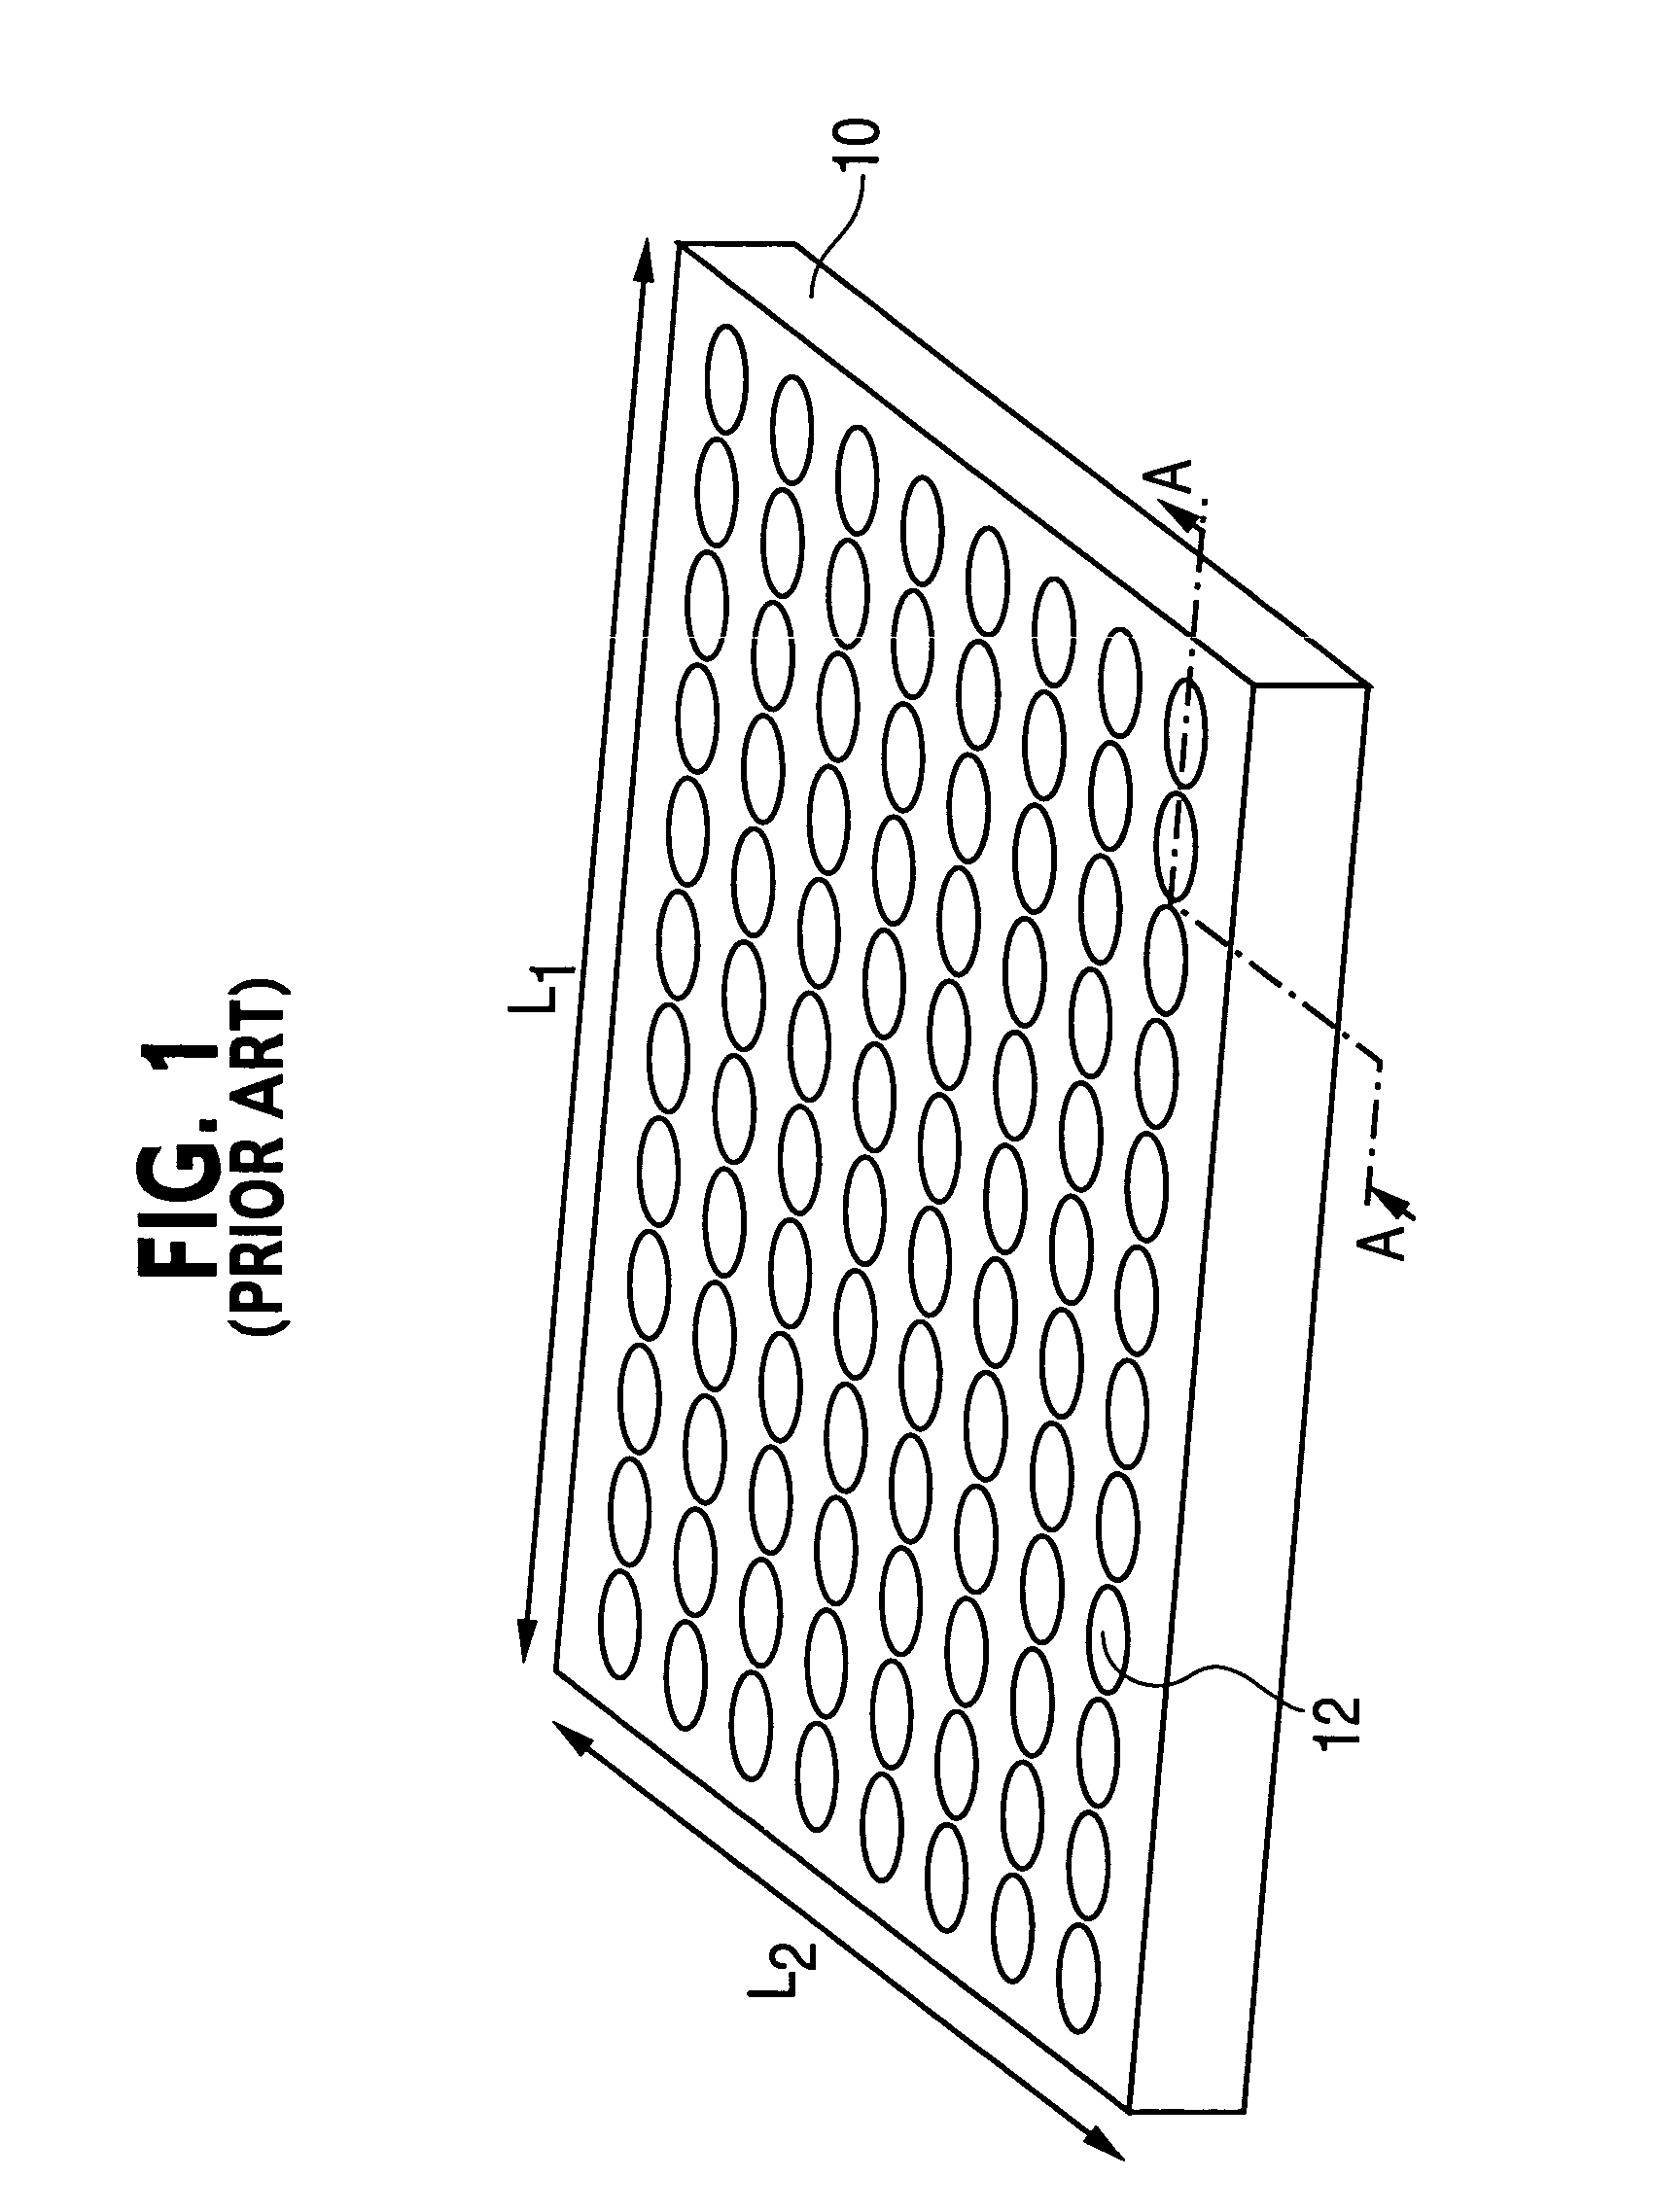 Kinetic microplate with temporary seals